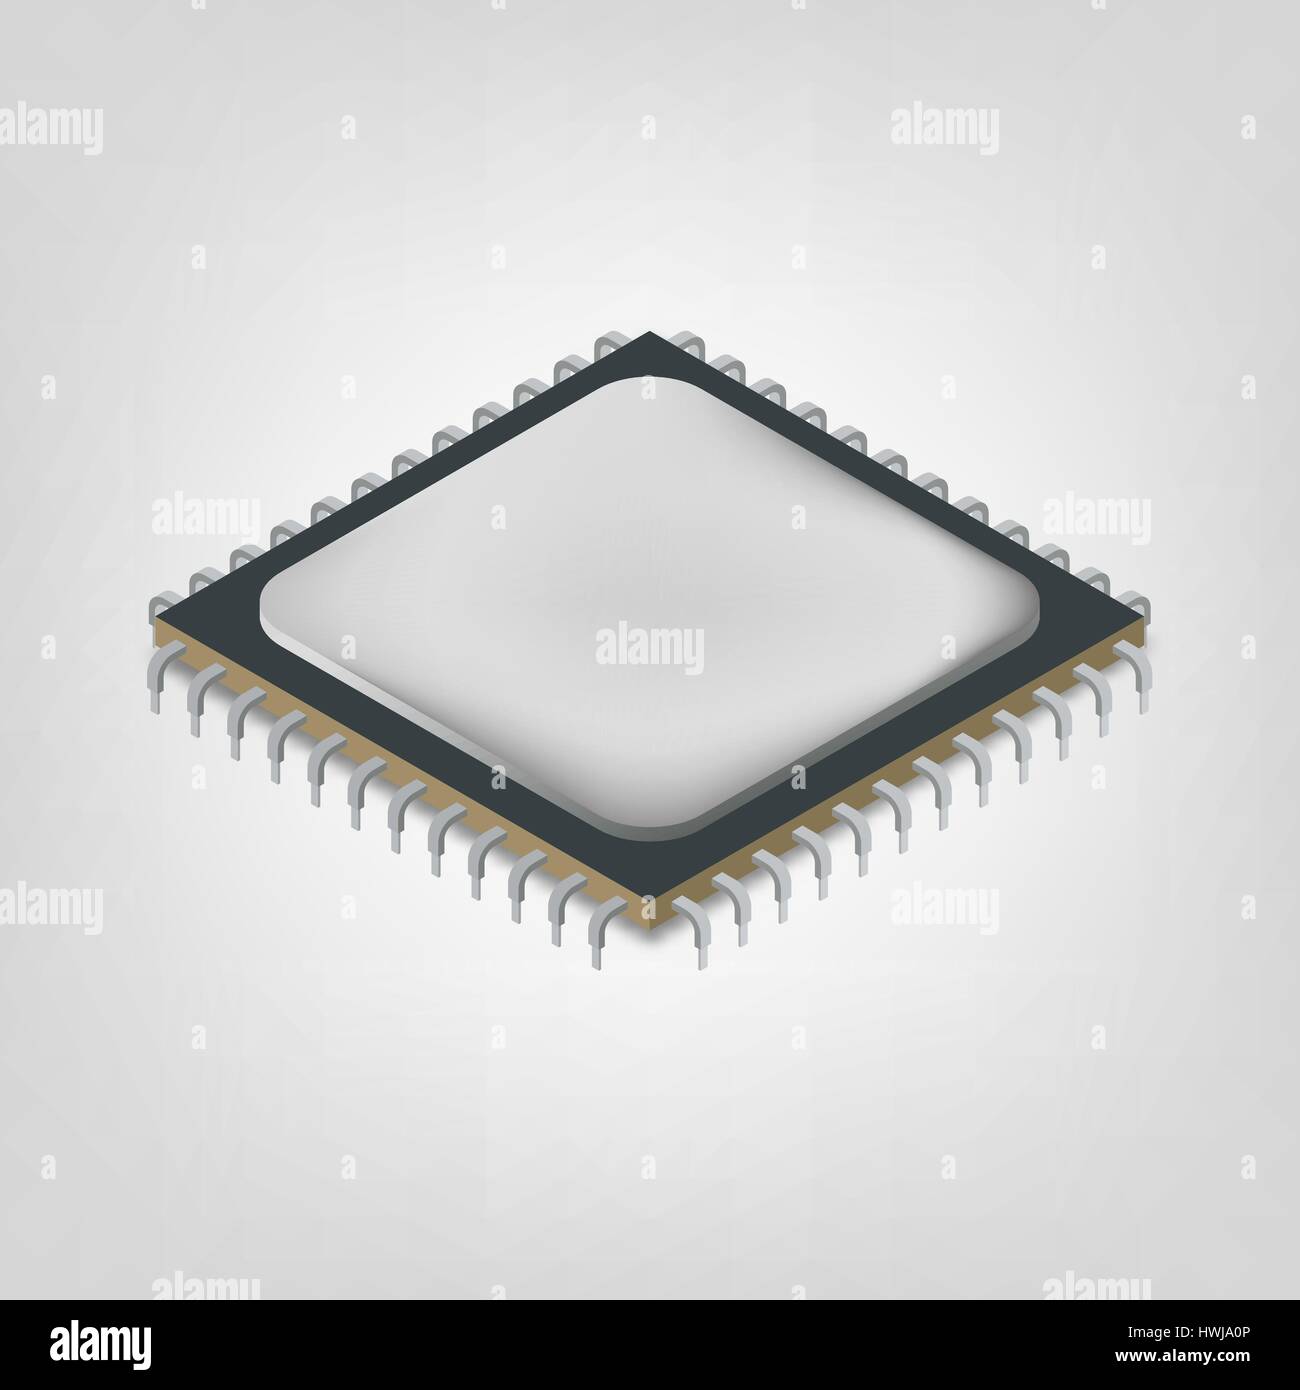 Central processing unit in an isometric view, isolated on white background. Element of design electronic components of digital devices and computer, v Stock Vector